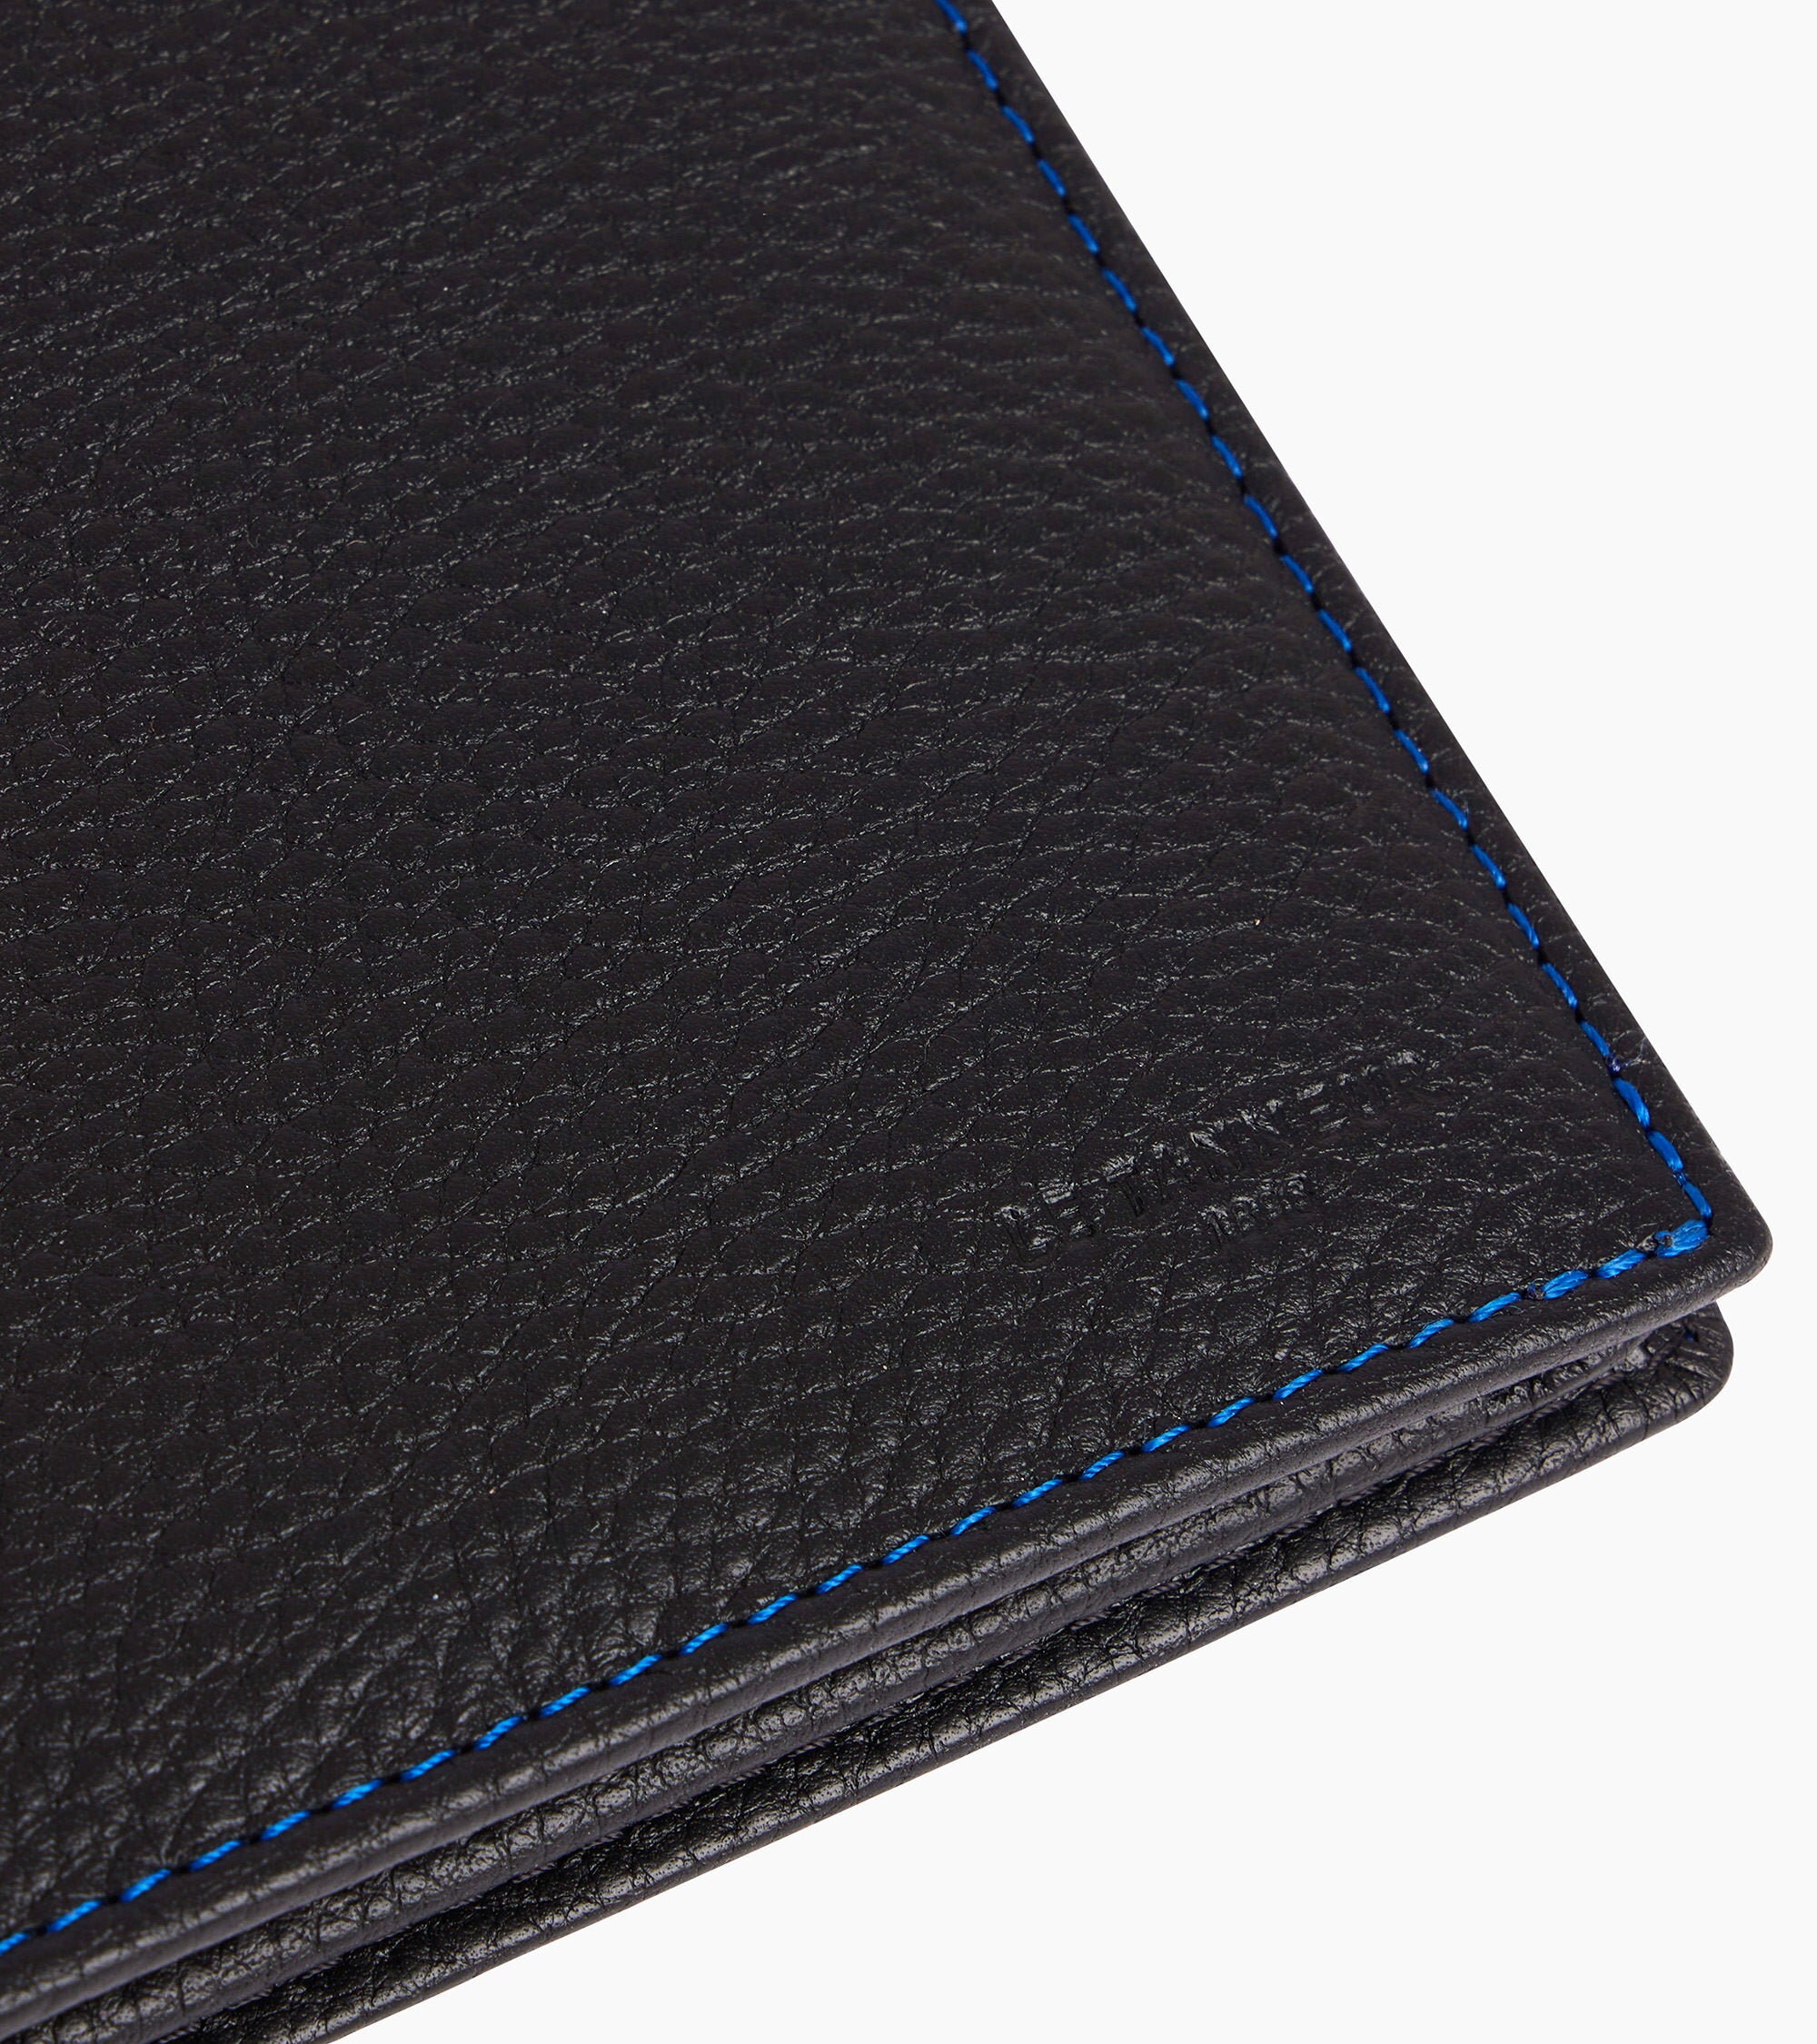 Charles horizontal, zipped wallet with 2 gussets in grained leather